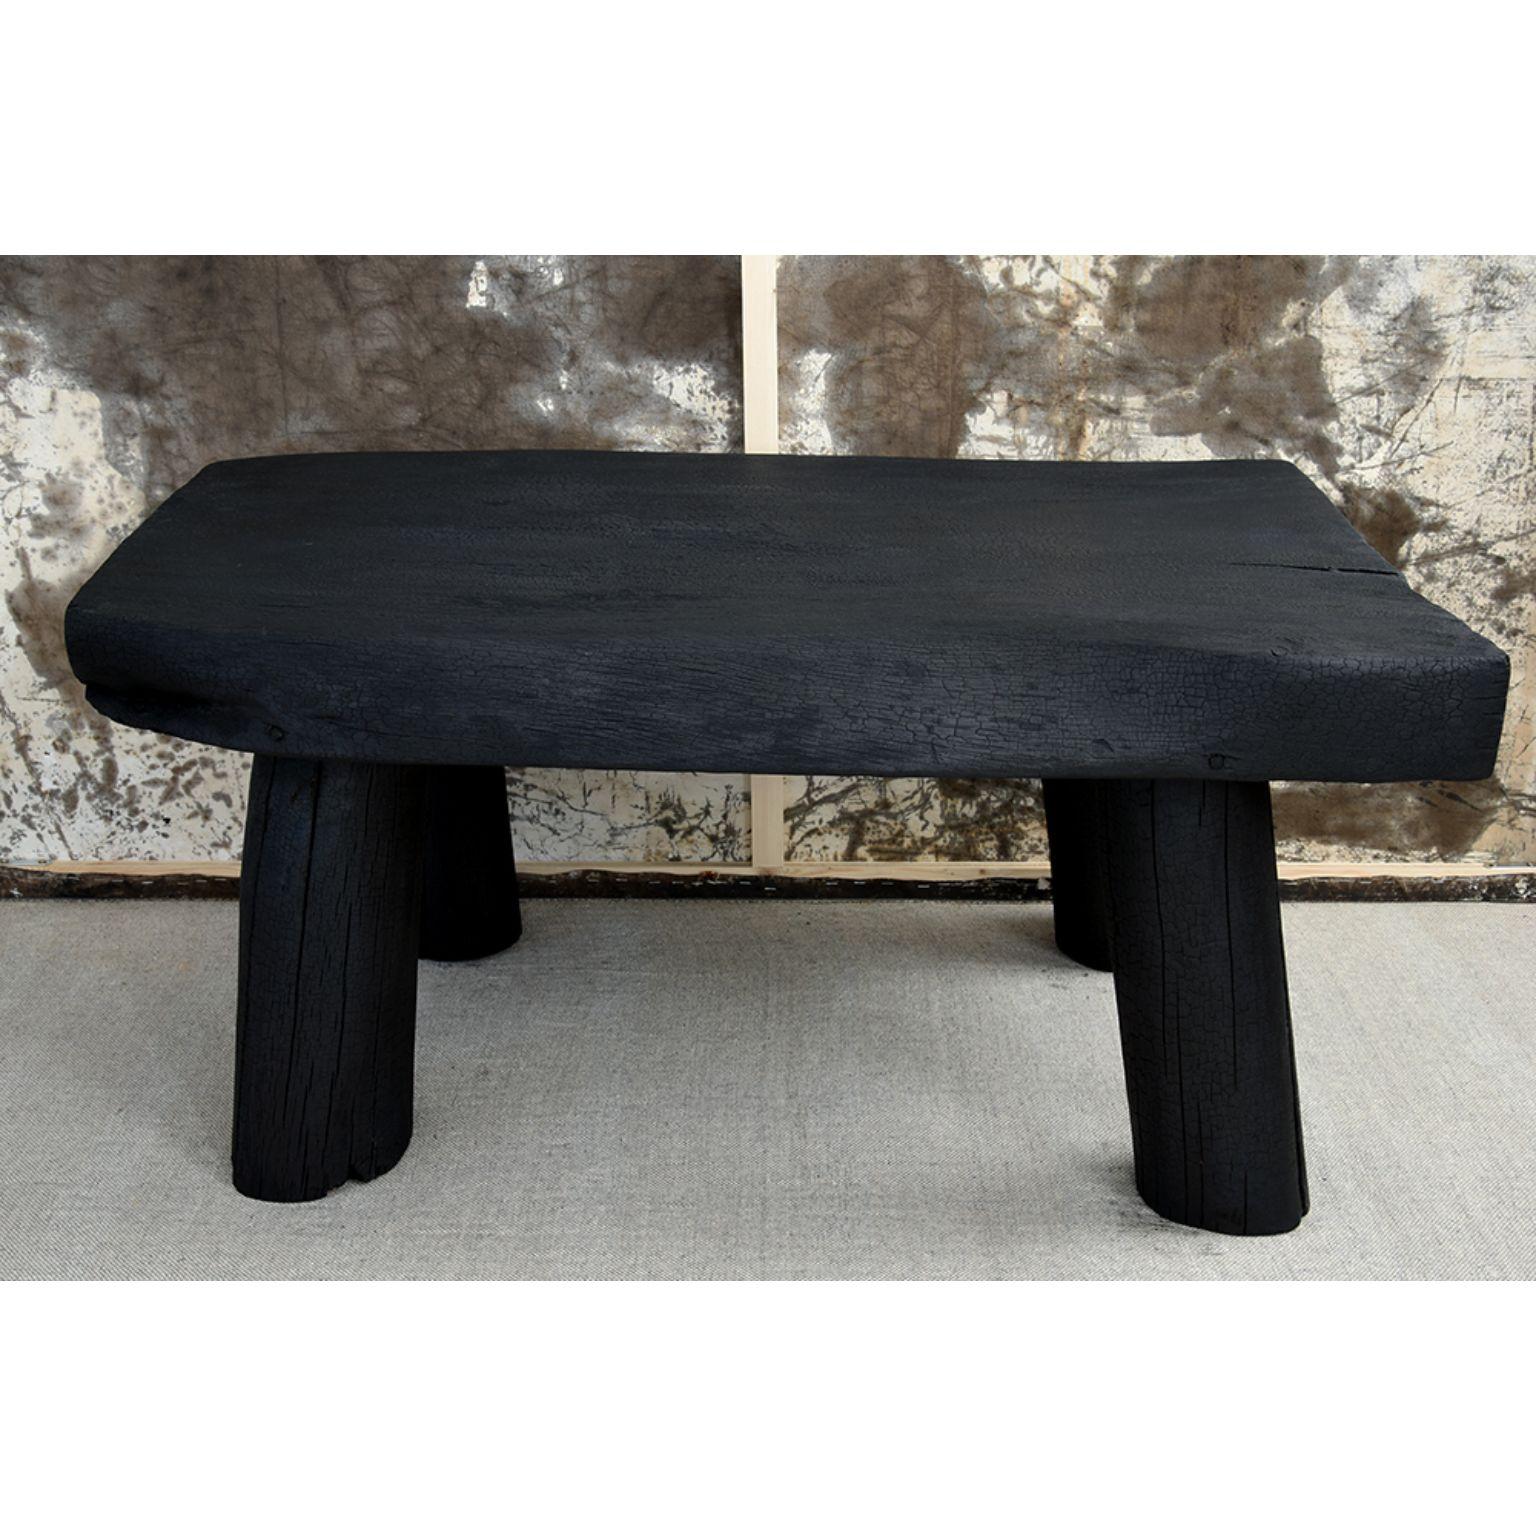 OTB.01 coffee table by Sebastien Krier + Bois Brulé
Dimensions: D95 x W60 x H43 cm
Materials: wood

All these pieces are unique, they are mottled, modified, refined and
burnt according to the Japanese technique SHOU-SUGI-BAN. With treatment in